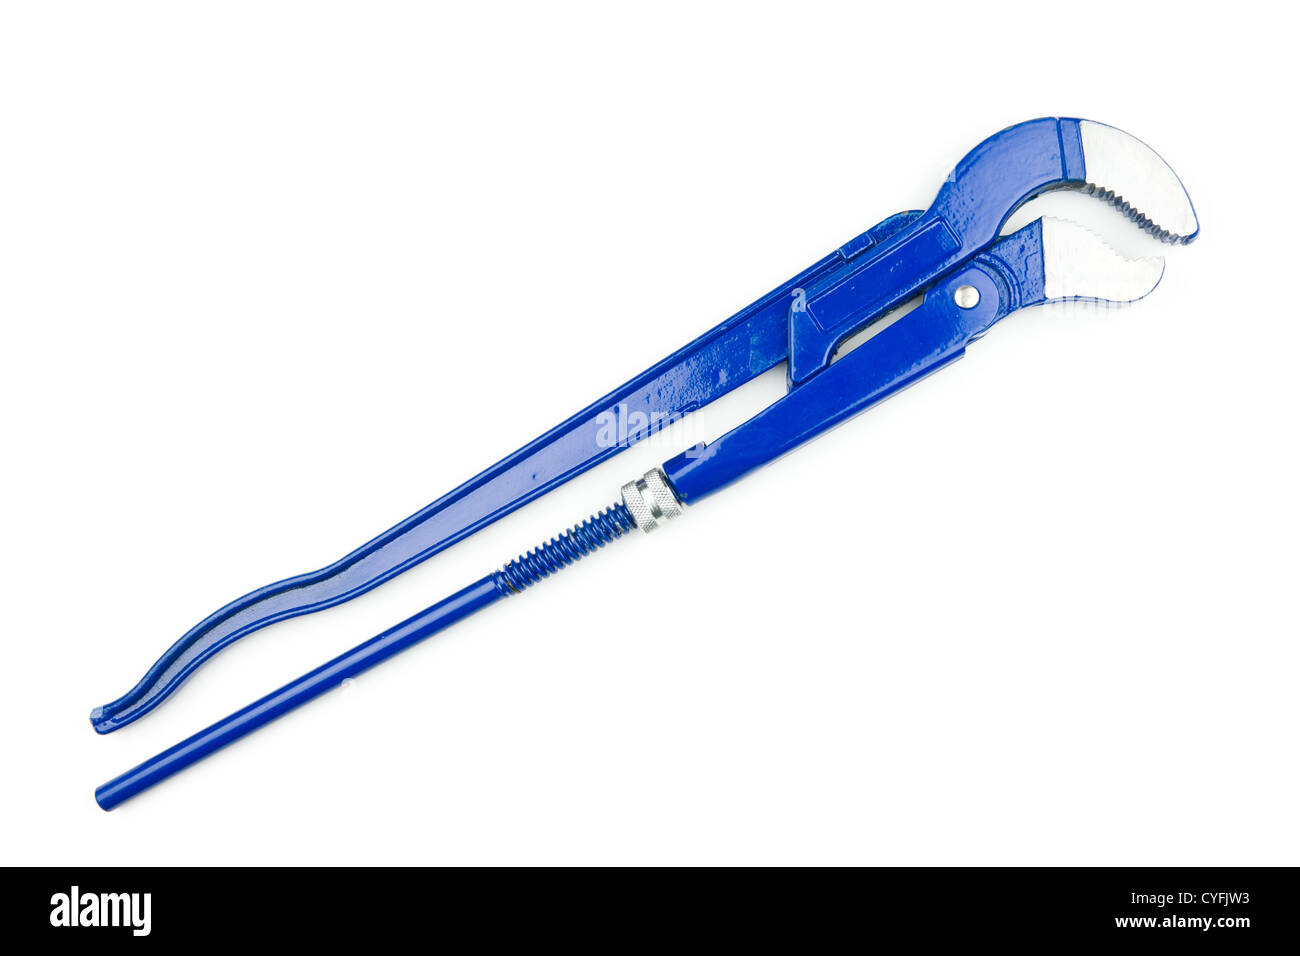 One big blue adjustable pliers and white background. Stock Photo